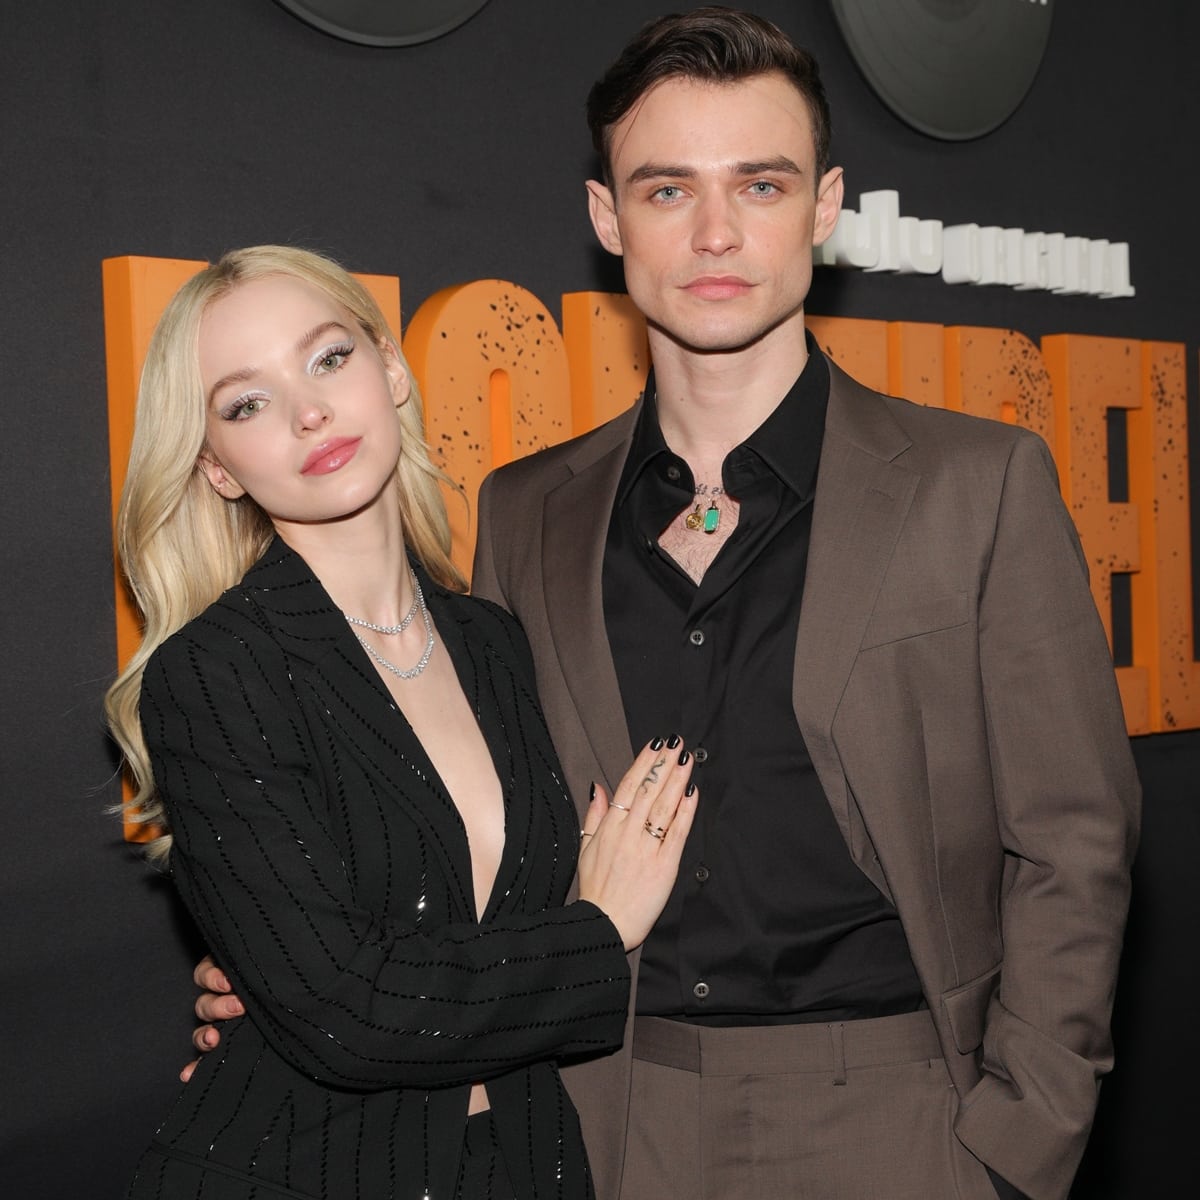 Dove Cameron and Thomas Doherty started dating in 2016 after meeting on the set of Descendants 2